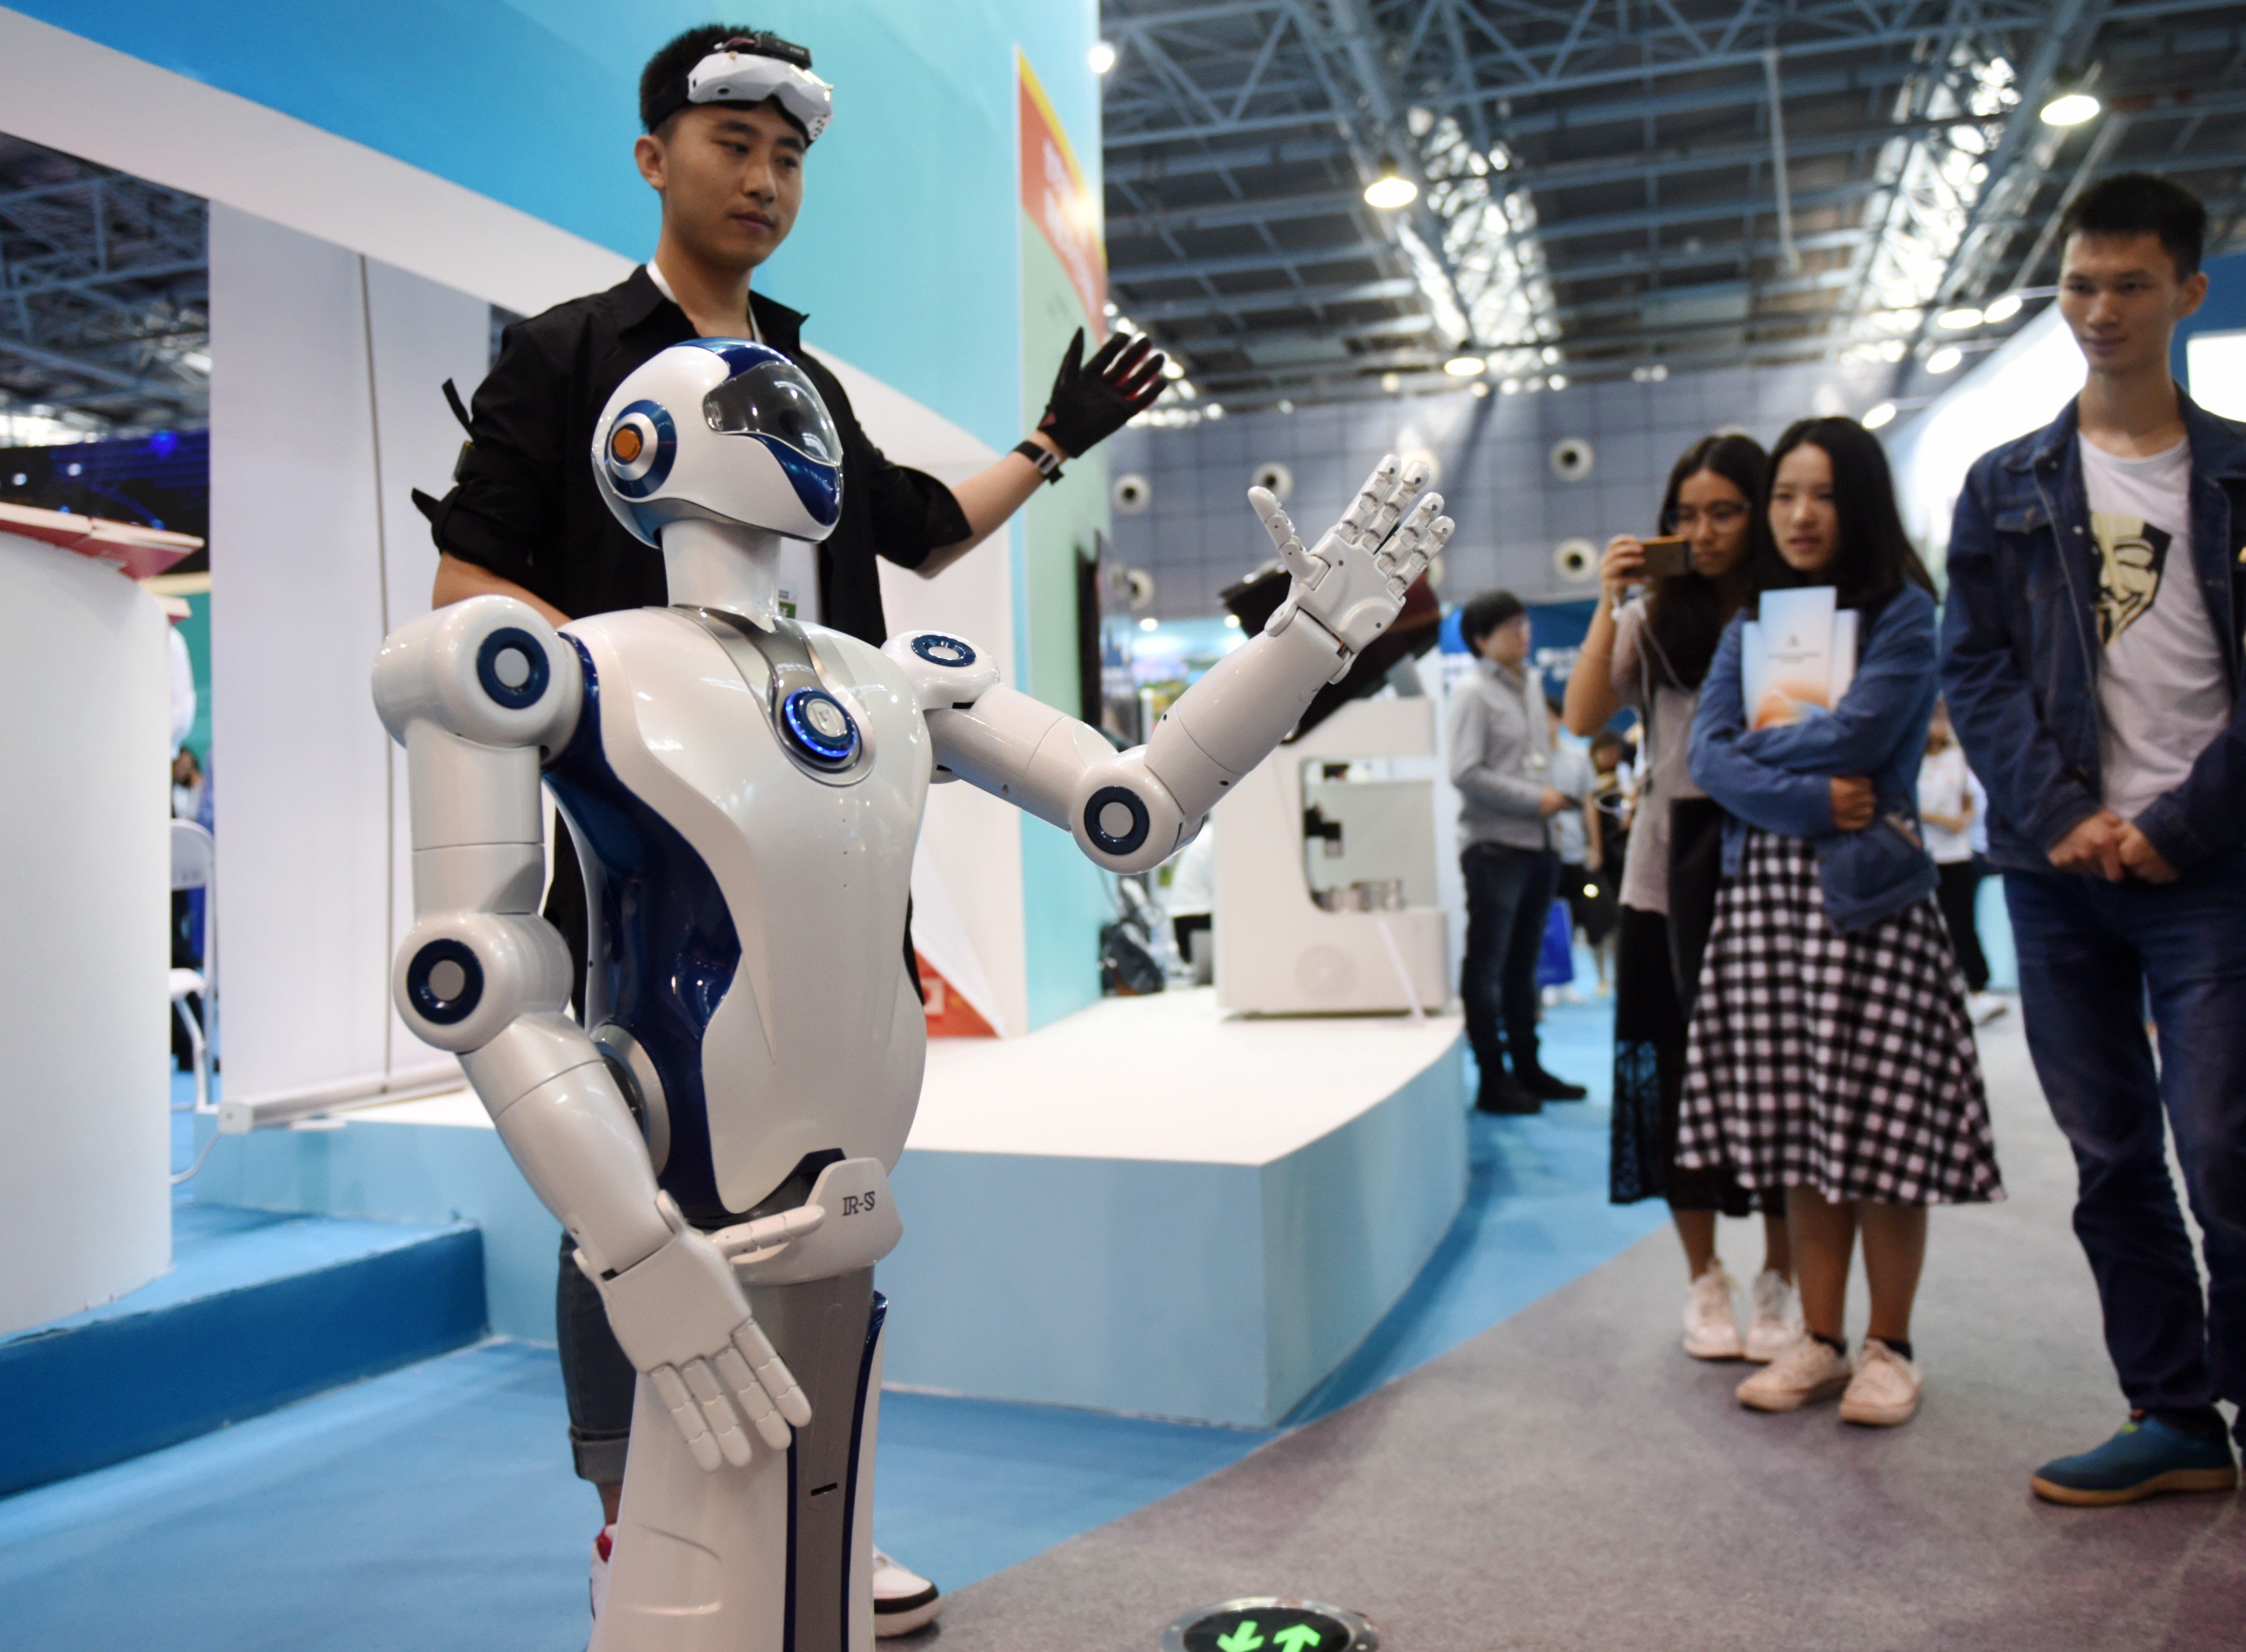 People watch a bionic robot at an exhibition during the 2017 national mass innovation and entrepreneurship week in Beijing on September 15. More than 300 items and projects on artificial intelligence, biotechnology, energy conservation and more were on display. Photo: Xinhua